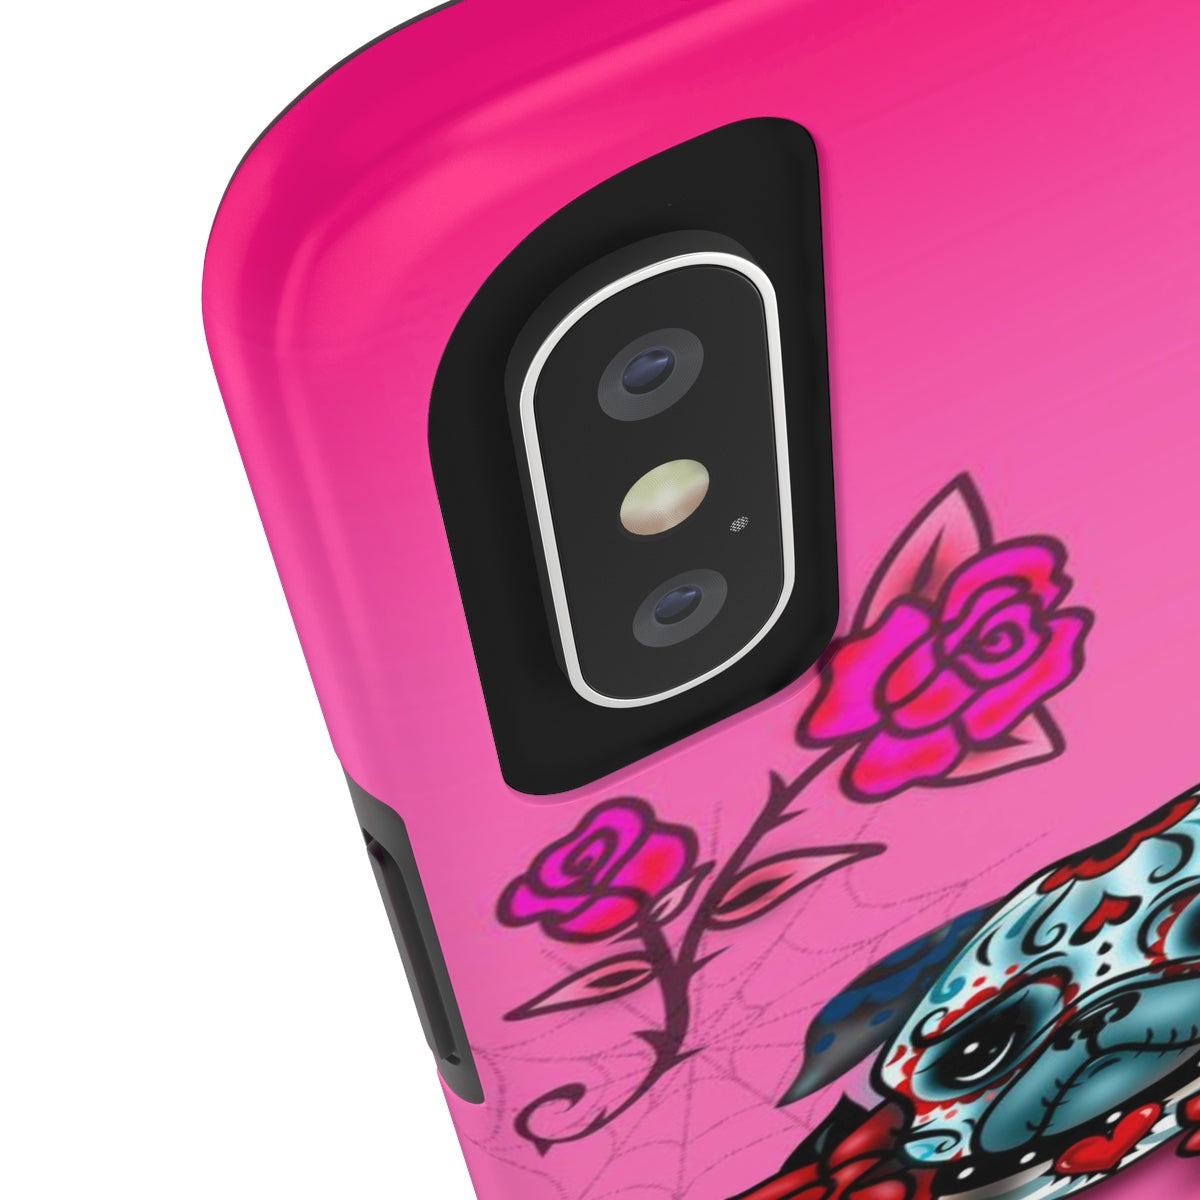 Sugar Skull Pug With Roses • Phone Case